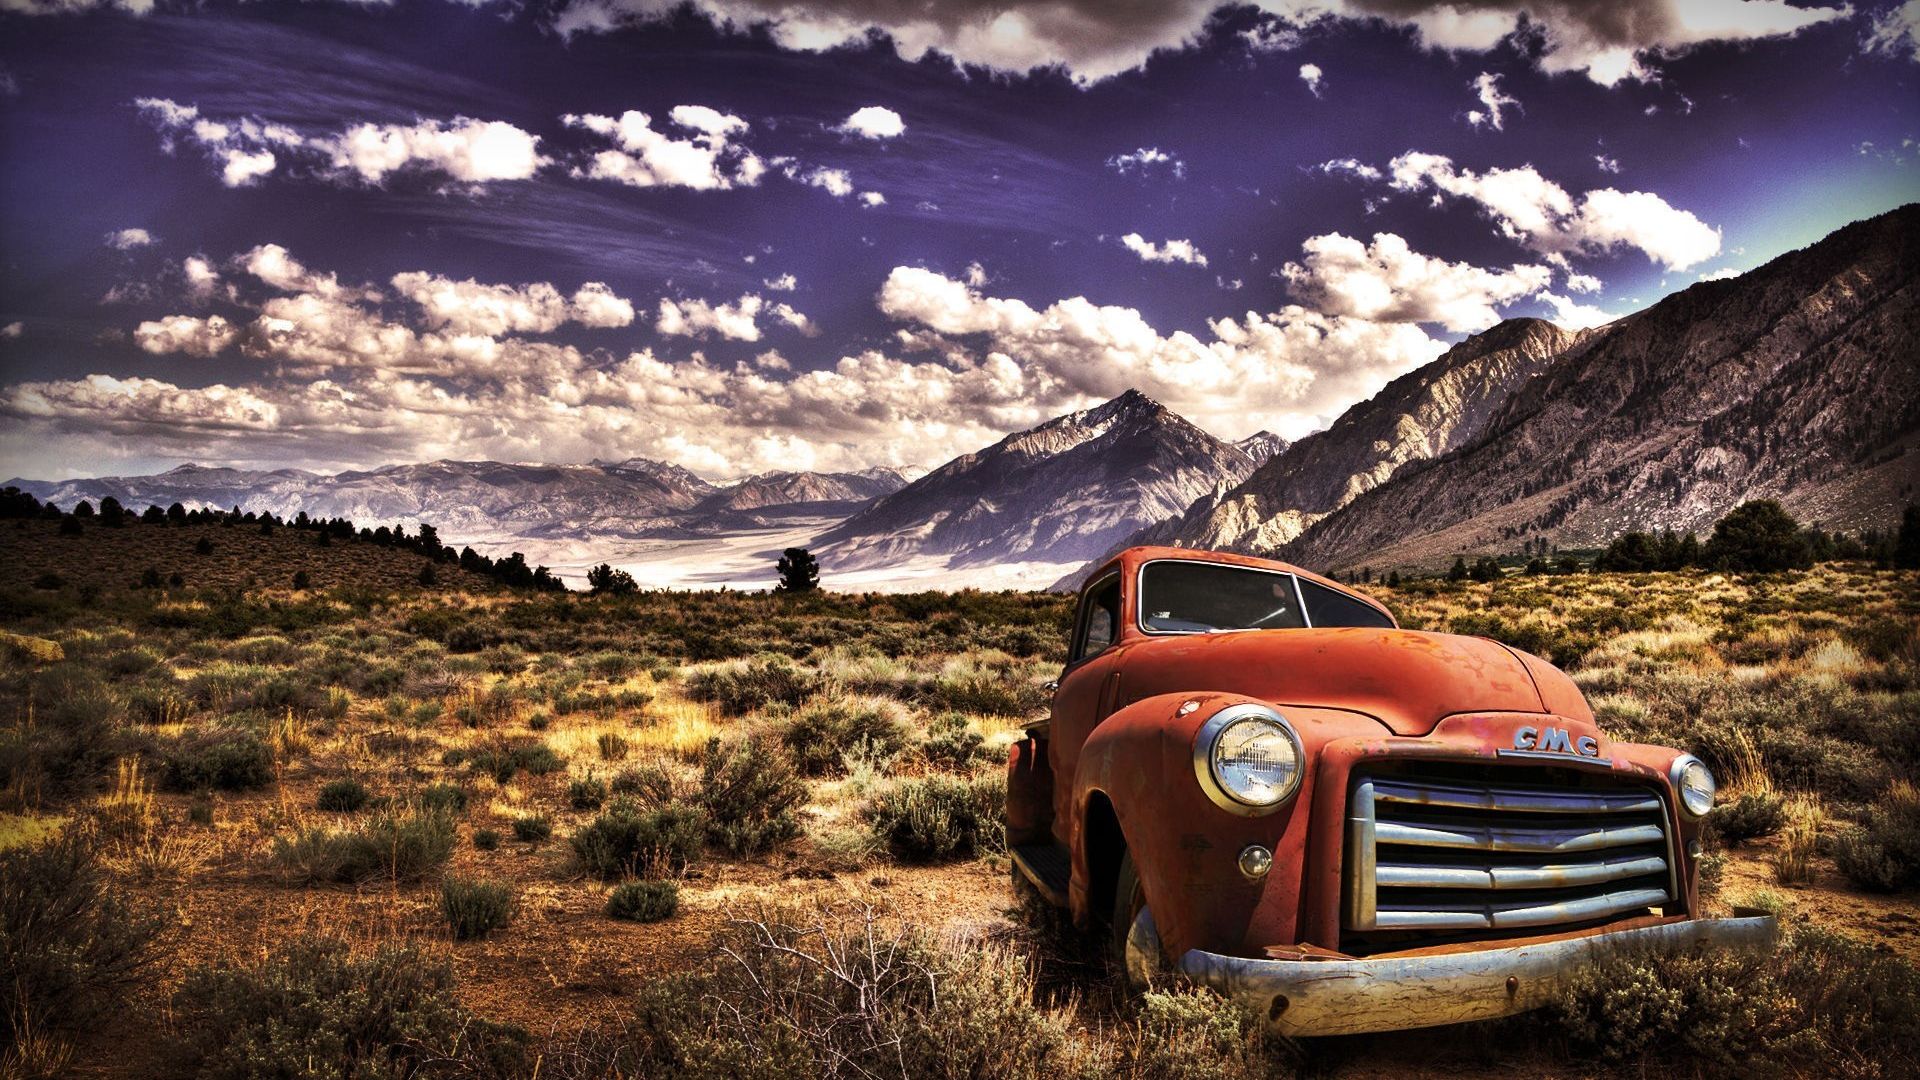 Wallpaper Vintage car and mountains